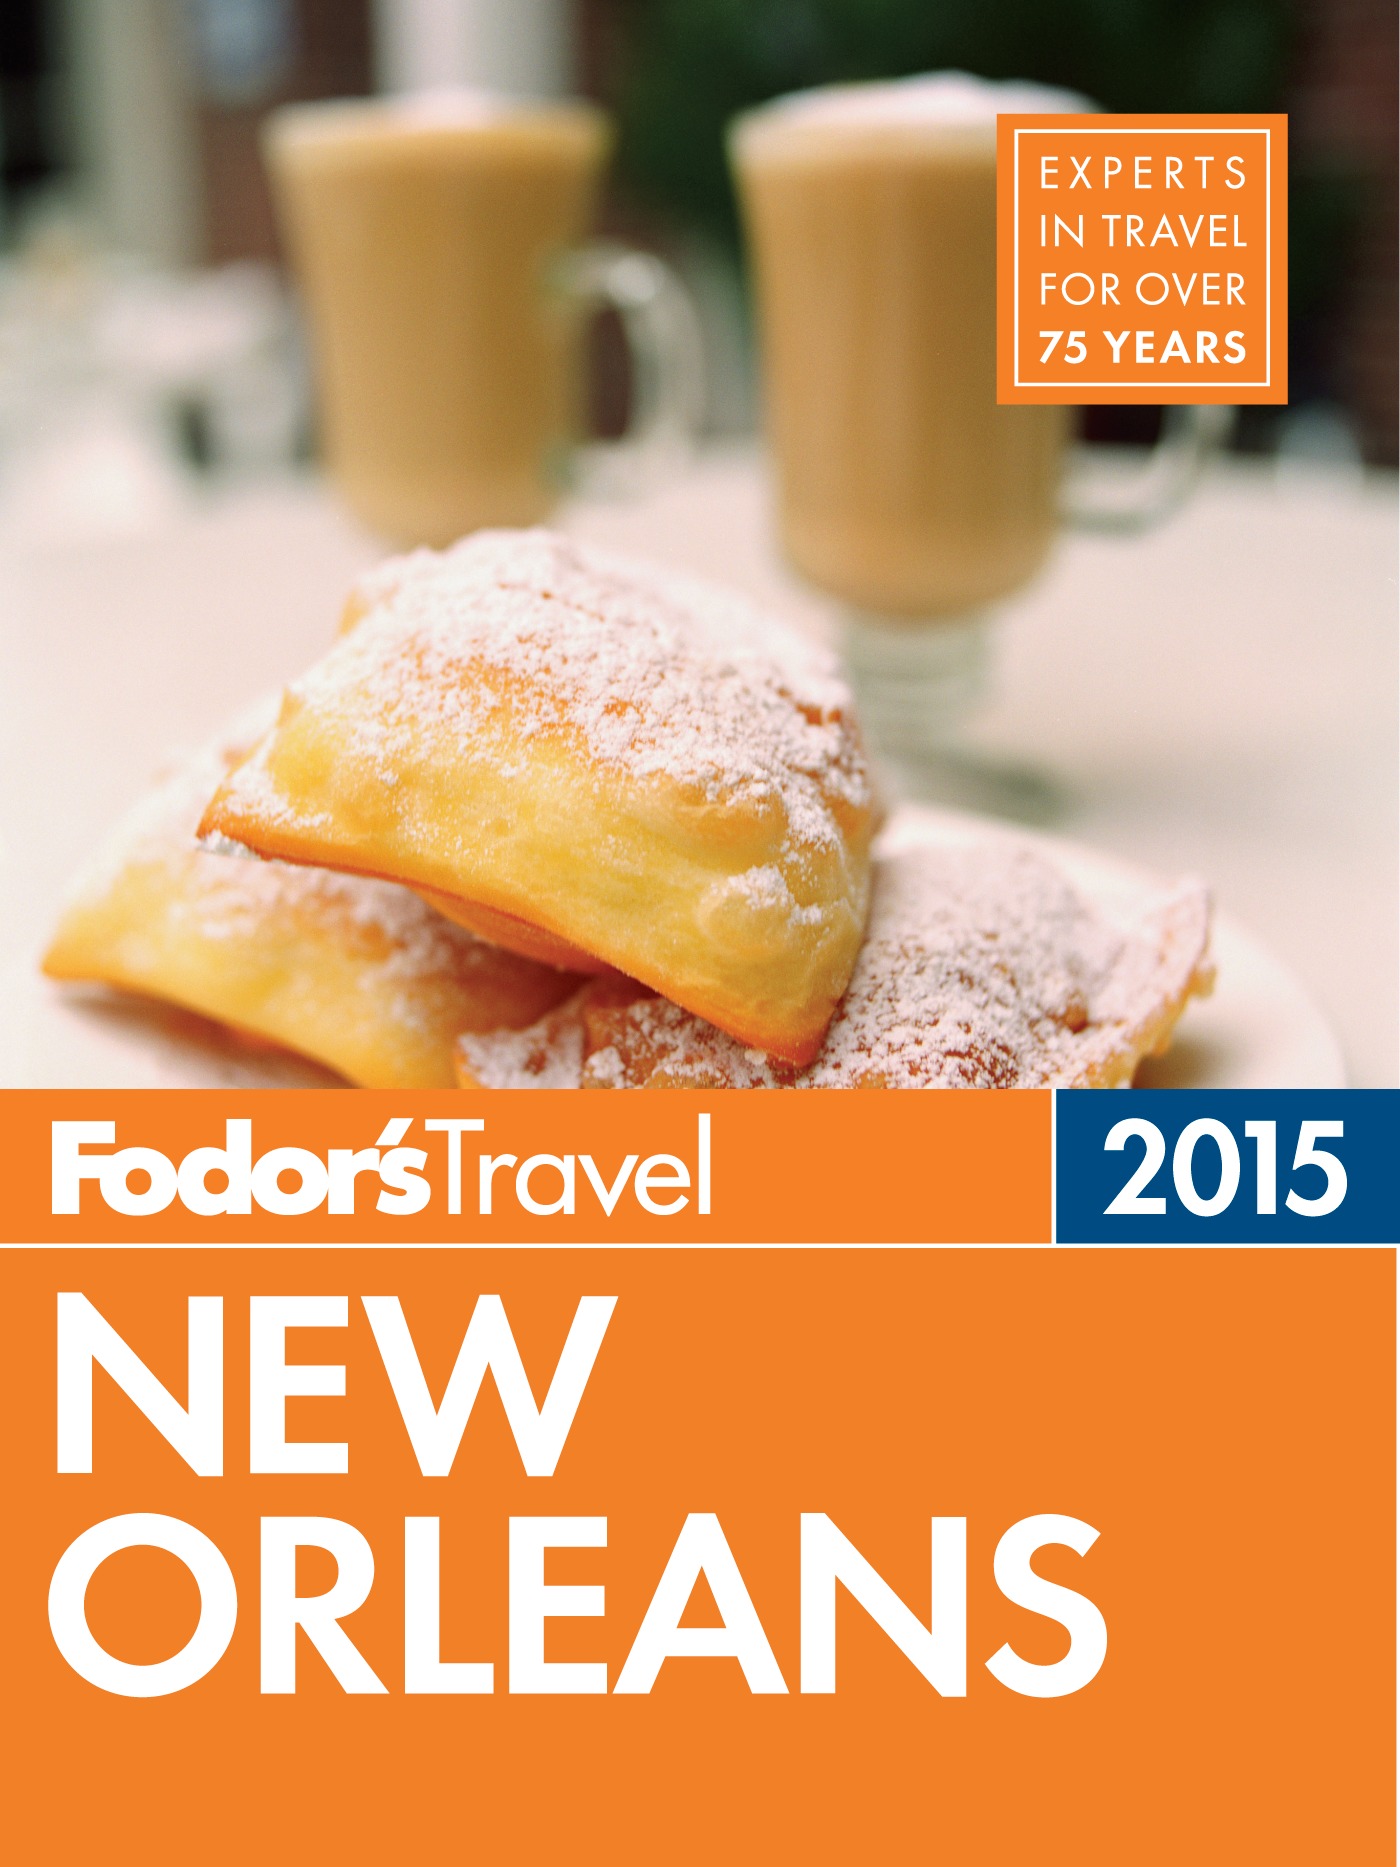 Fodor's New Orleans 2015 cover image